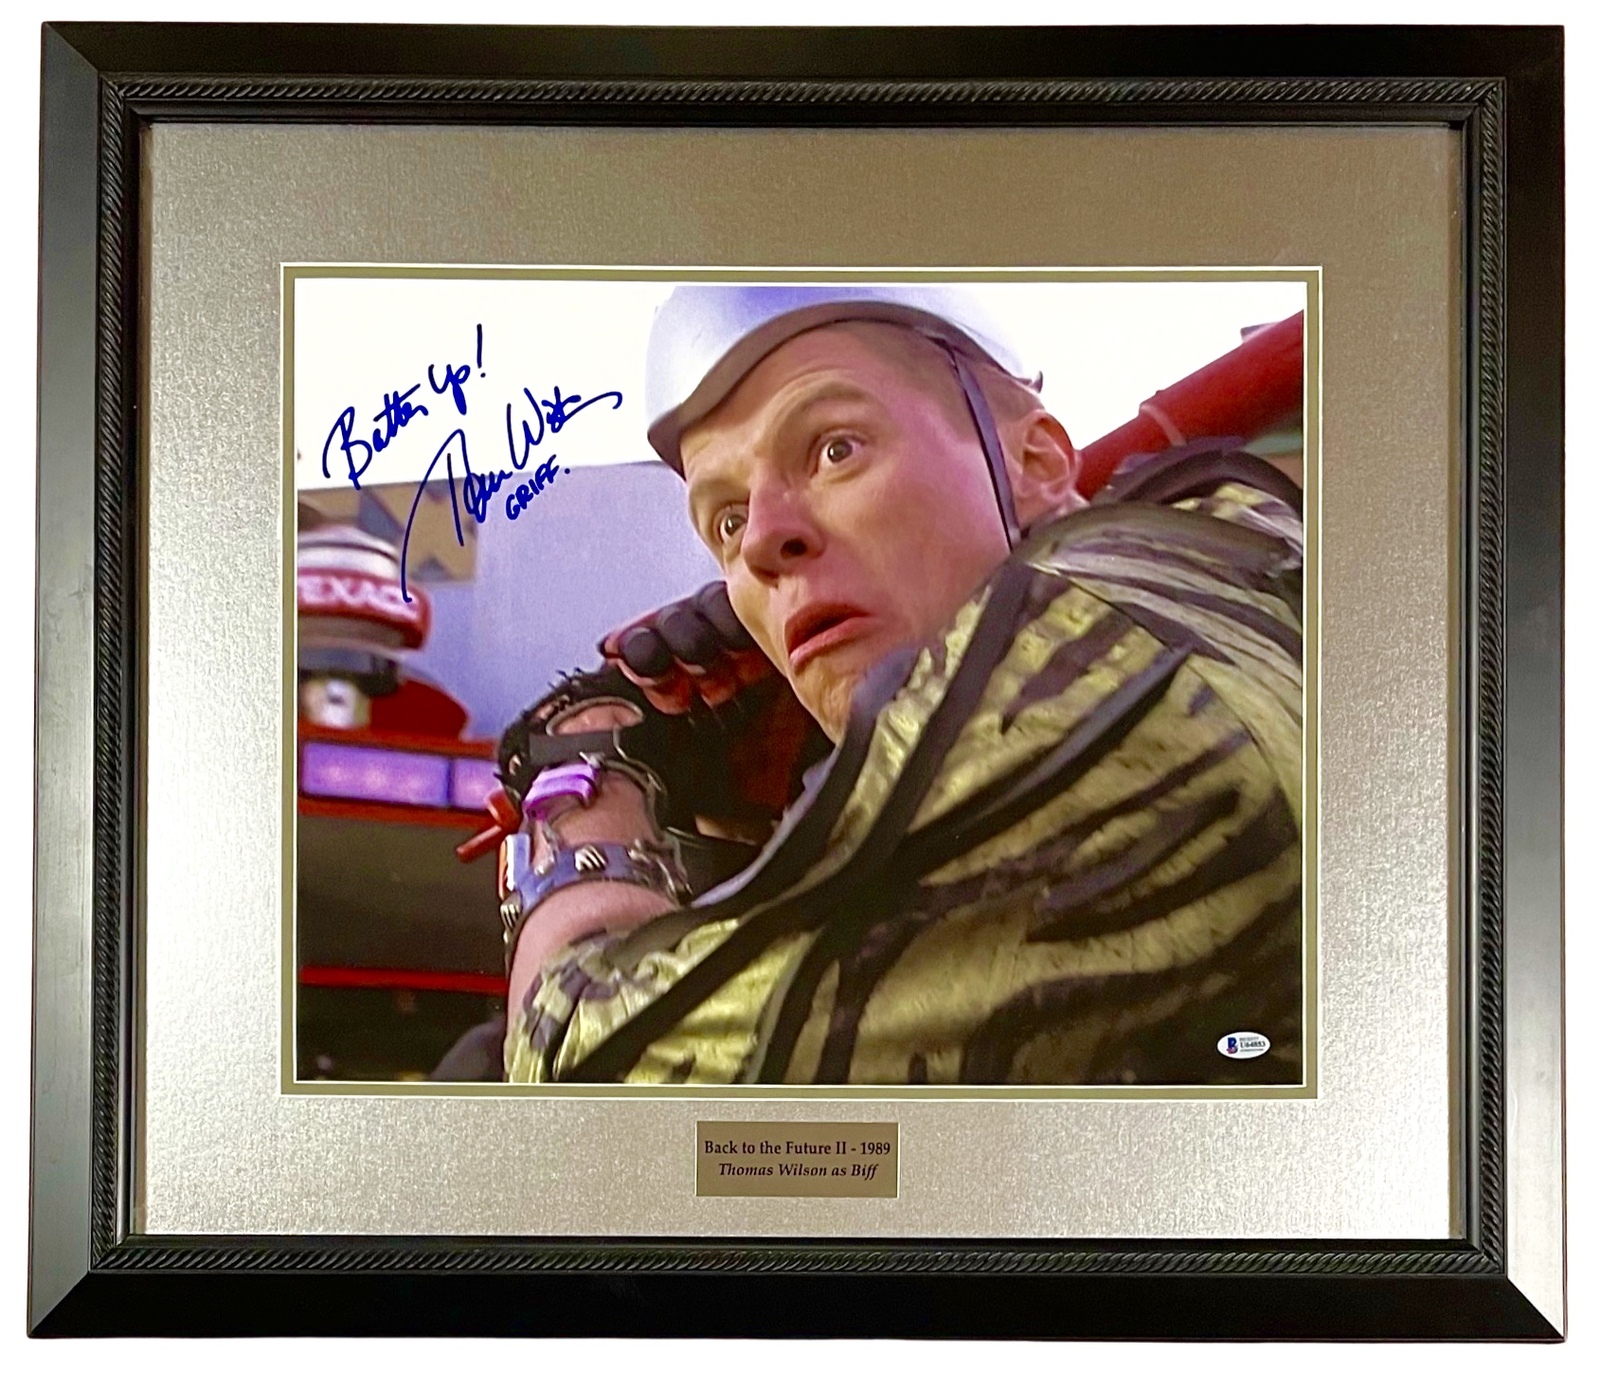 Primary image for TOM WILSON Autograph Signed 16x20 PHOTO BACK TO THE FUTURE II FRAMED BECKETT 